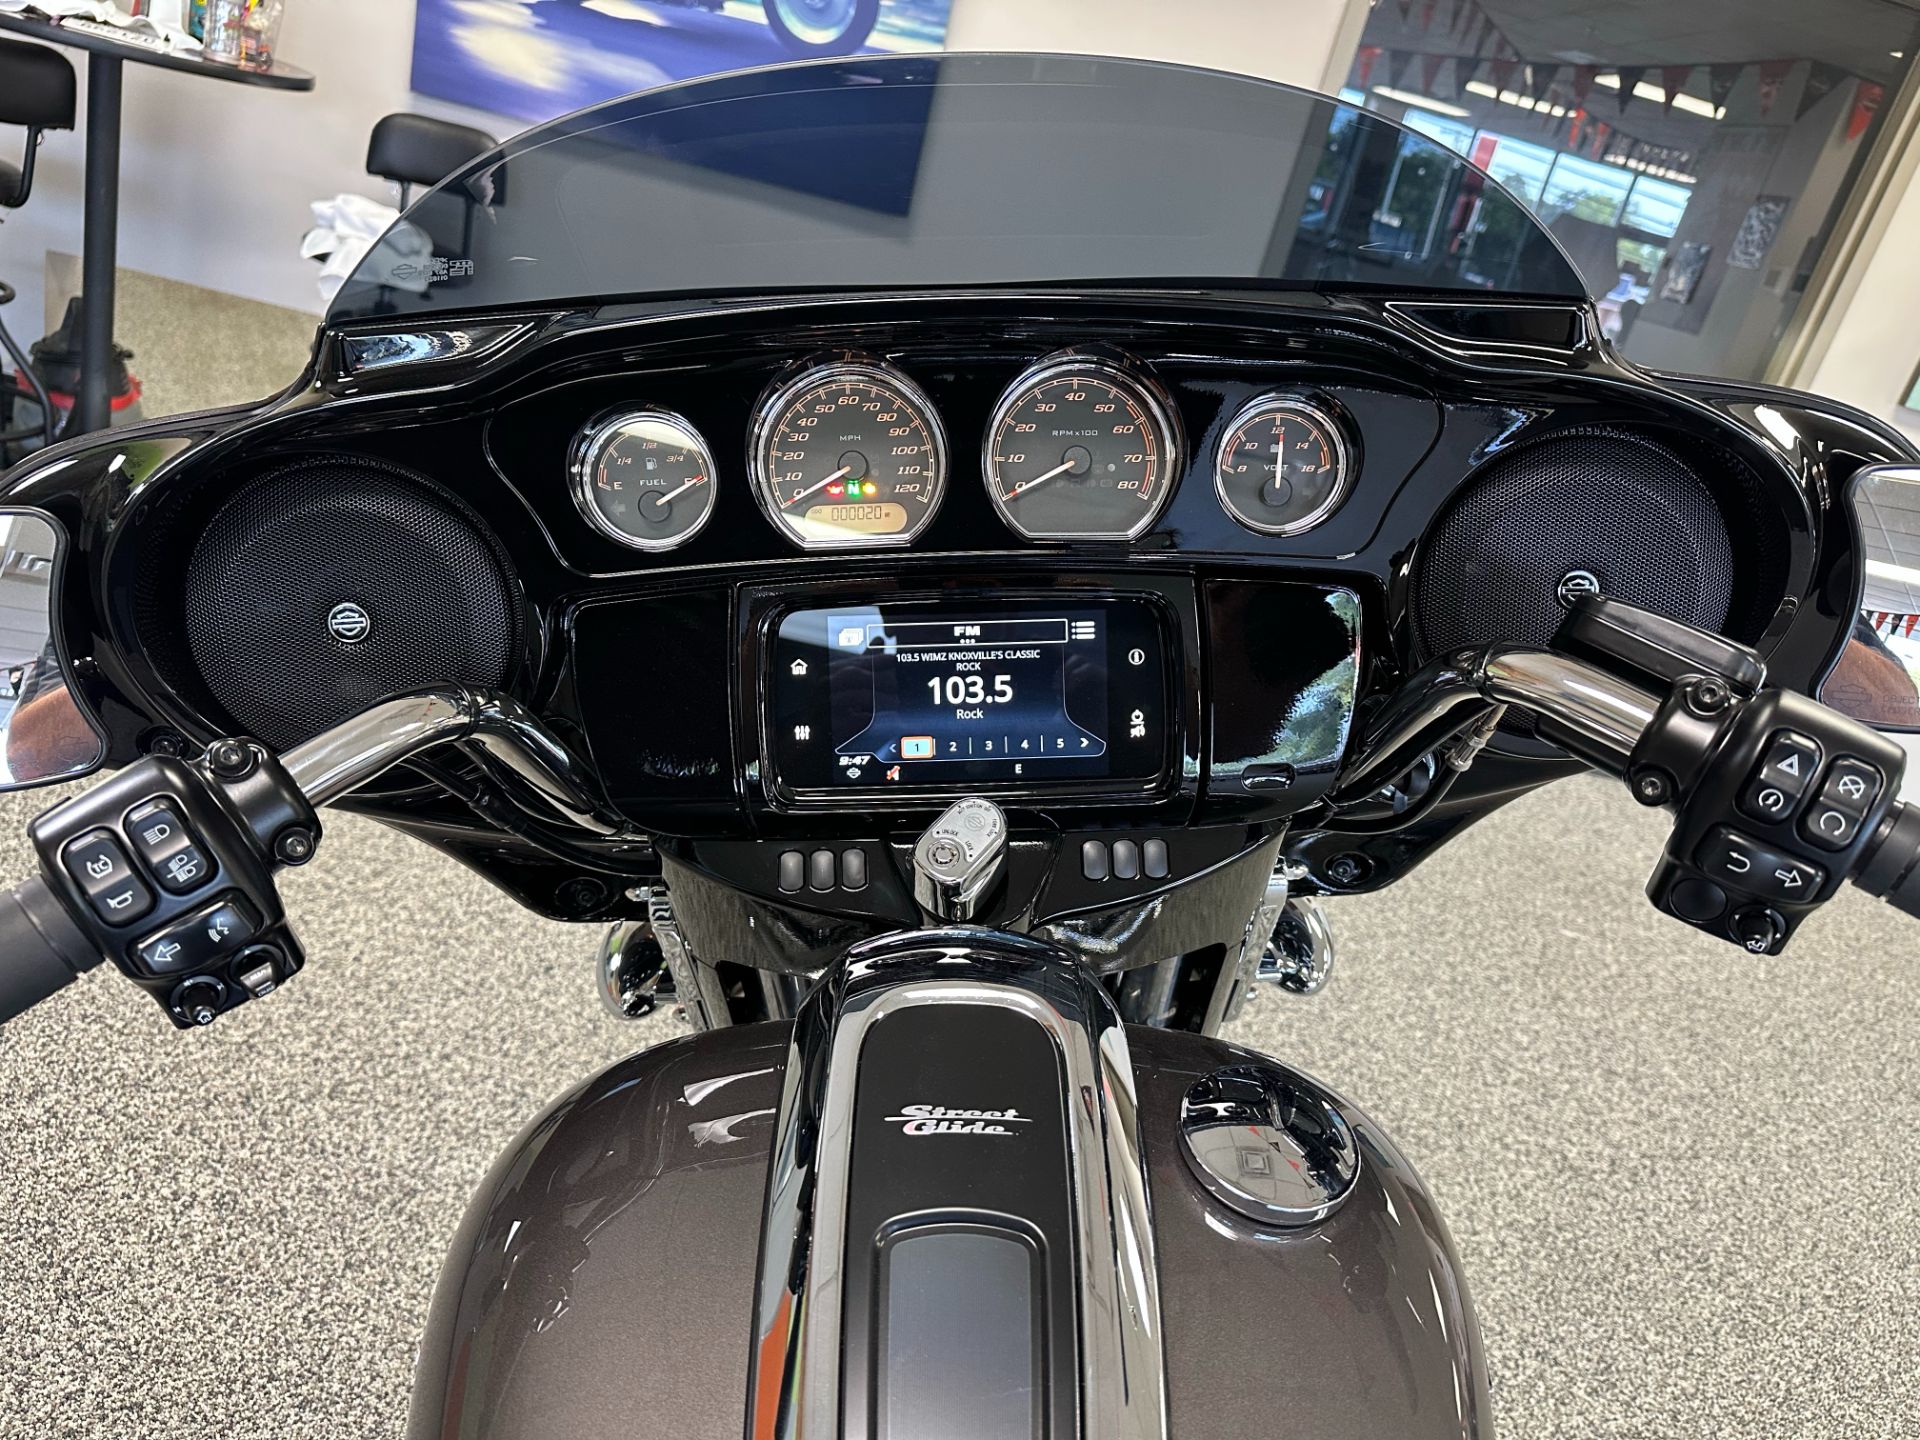 2023 Harley-Davidson Street Glide® Special in Knoxville, Tennessee - Photo 18